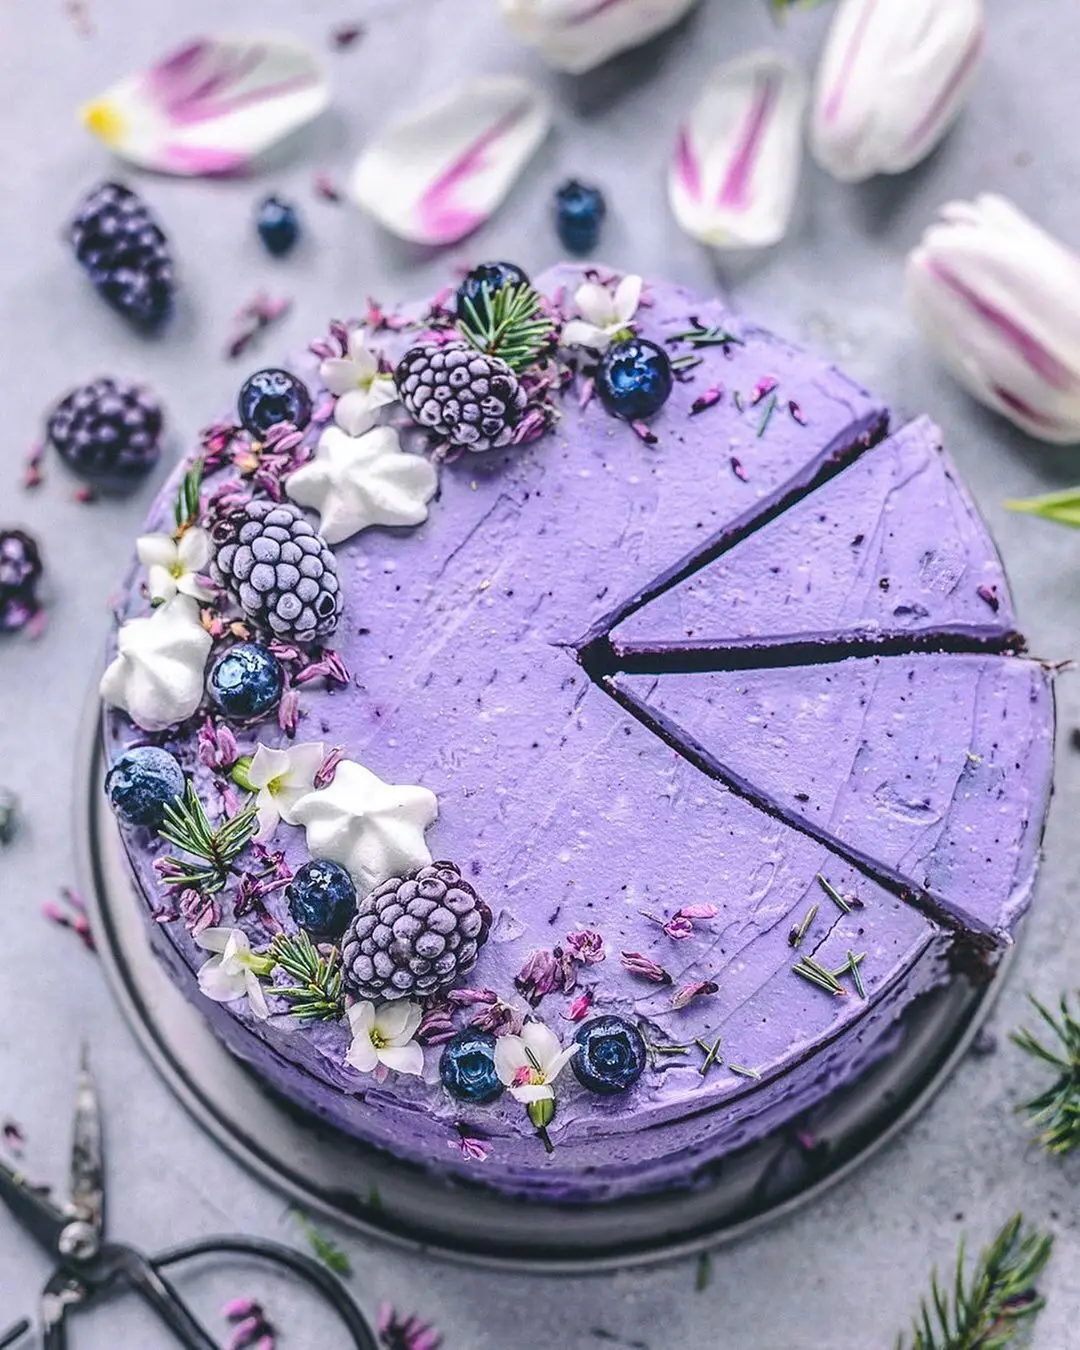 24 of Todays Most Marvelous Cake and Dessert Inspo for Girls Who Love to Be in the Kitchen  ...